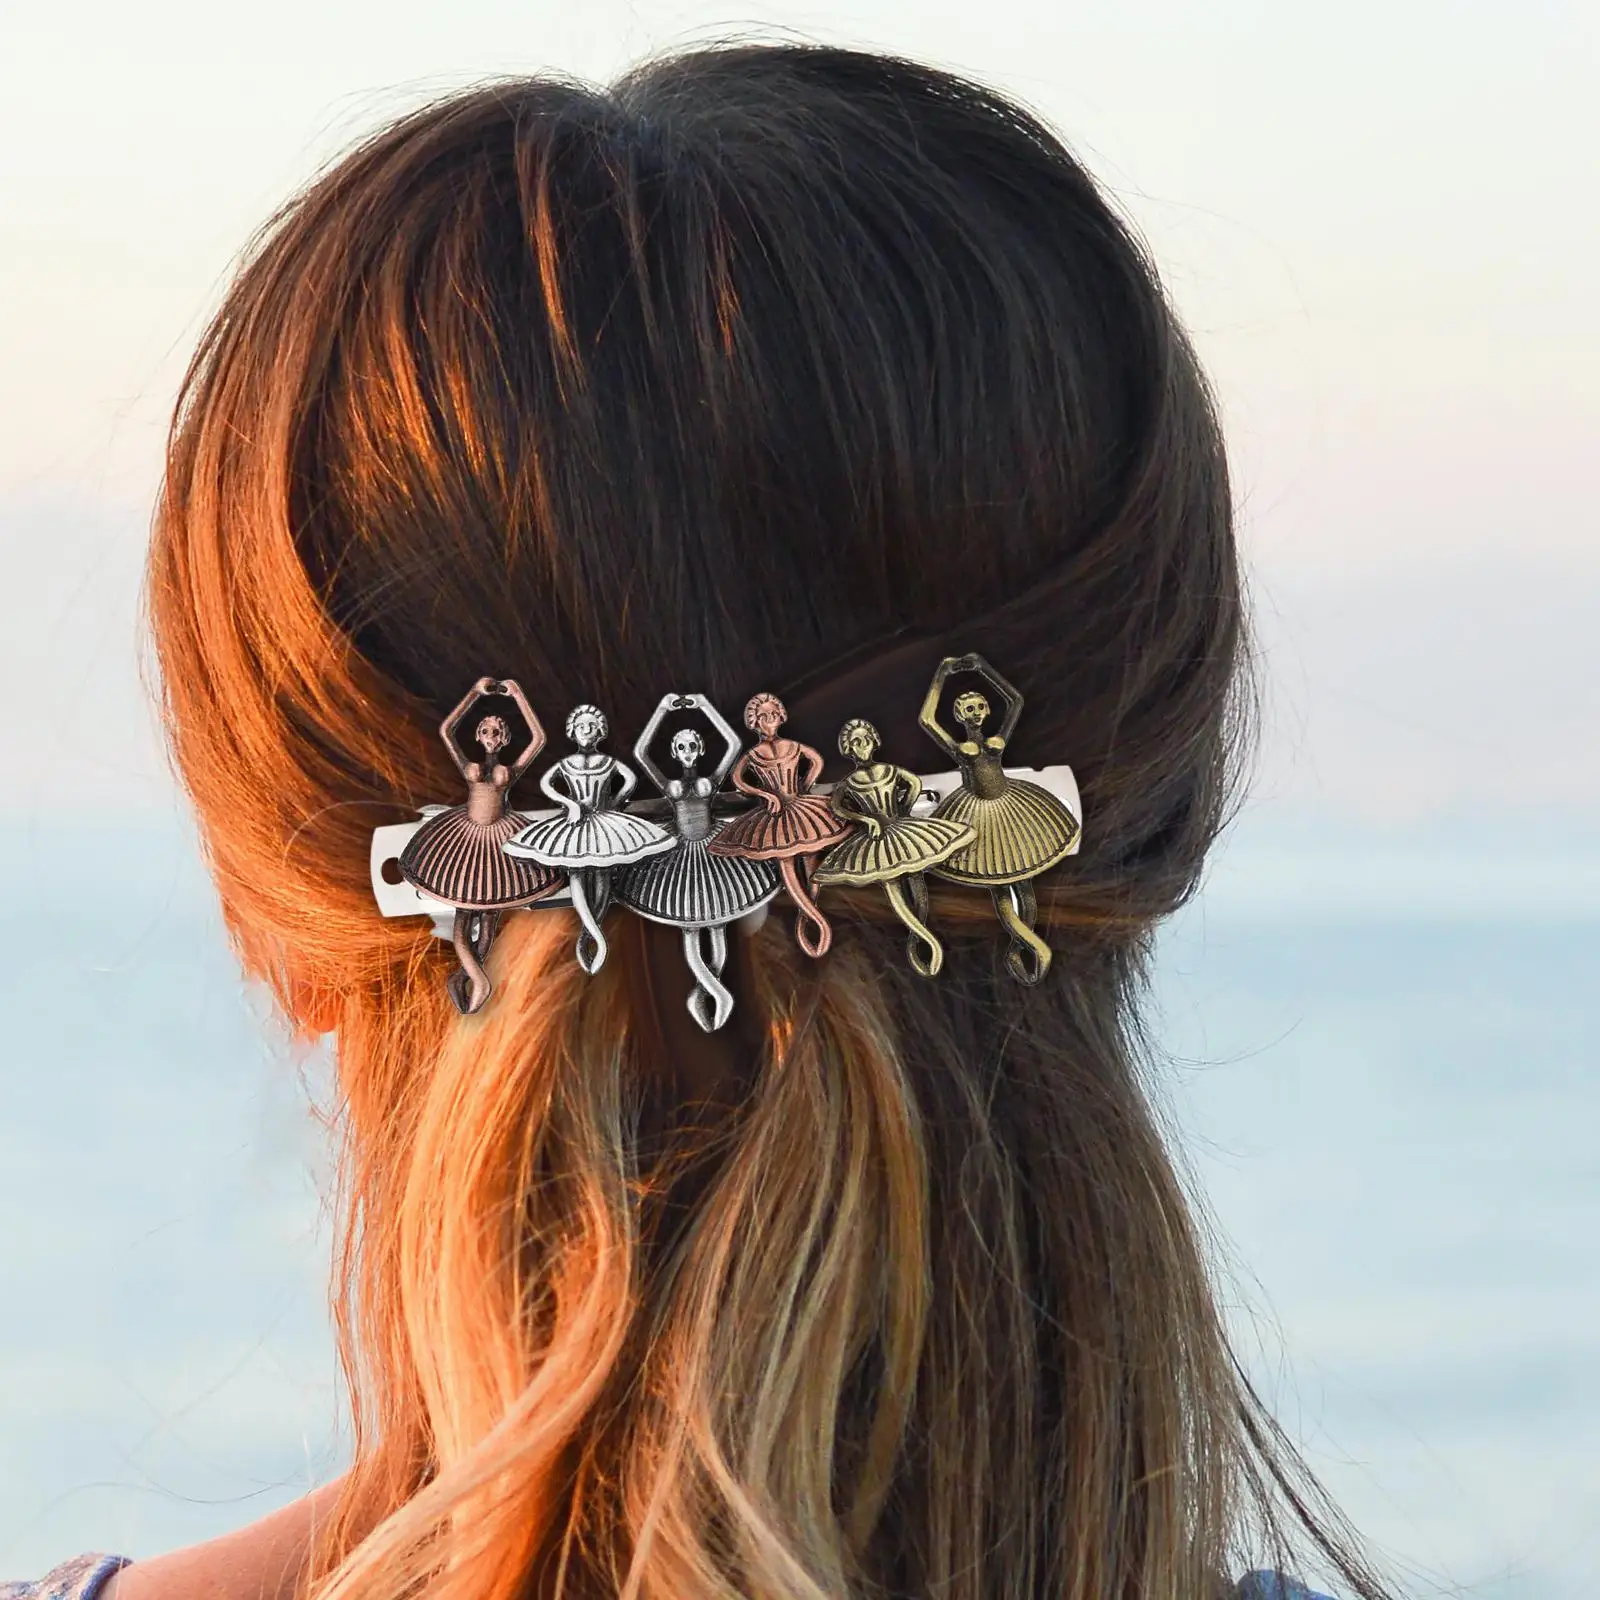 Hair Clip Headpiece French Snap Headdress Hair Jewelry Vintage Style Hairpin for Women Hair Styling All Hair Types Female Party